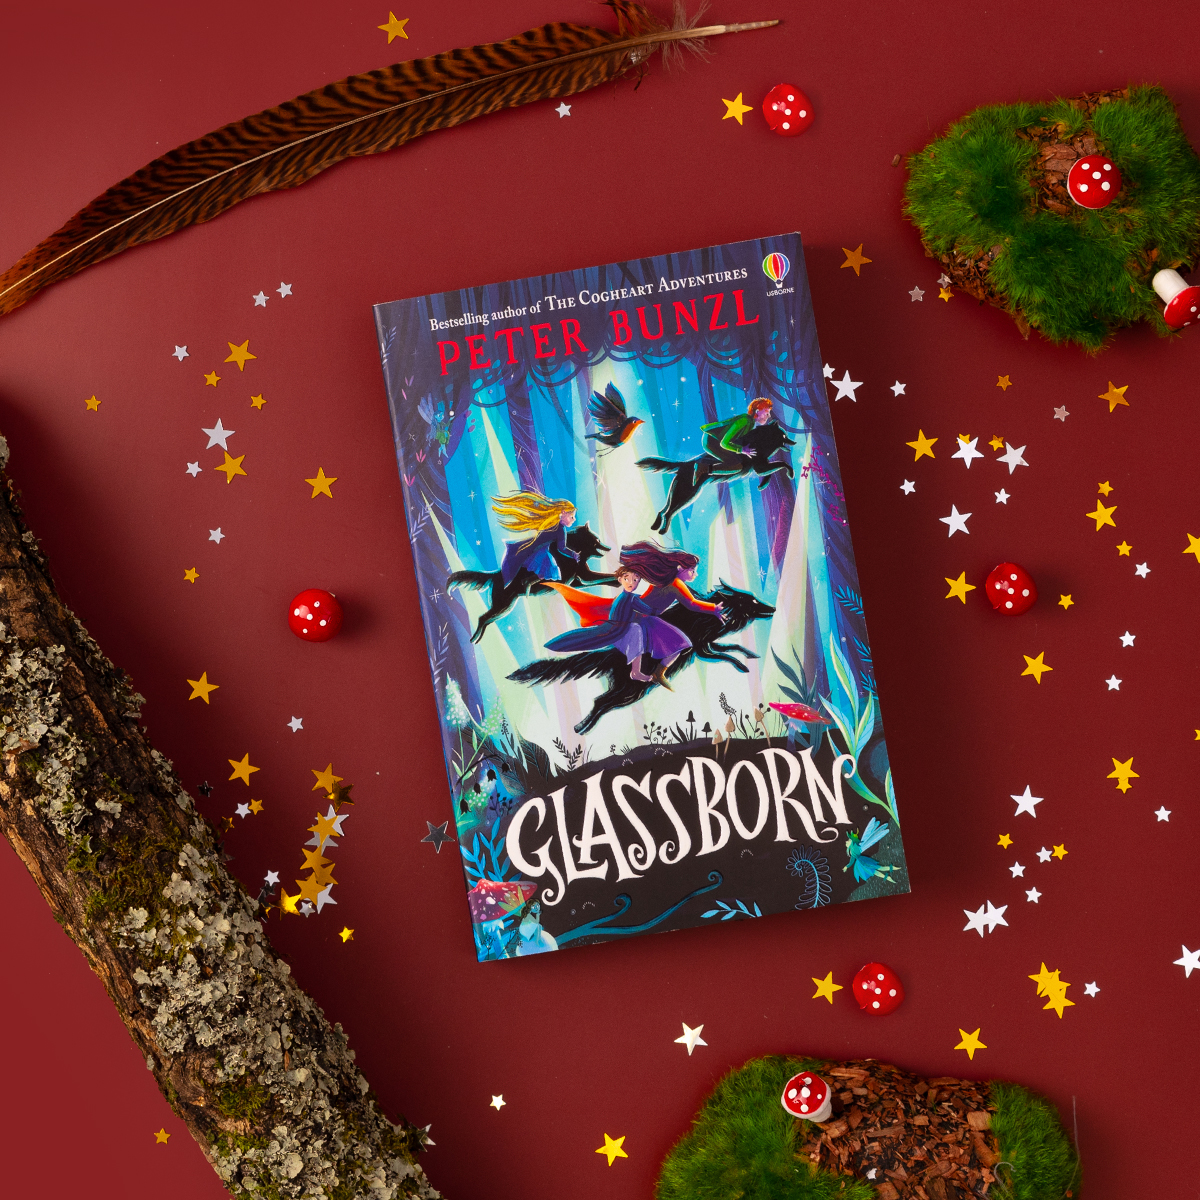 We're continuing our countdown to Christmas giveaways to celebrate some of our brilliant books of 2023 🌟 For the chance to win a copy of Glassborn, a magical adventure from bestselling author Peter Bunzl, follow us and RT! UK only. Ends 3/12.